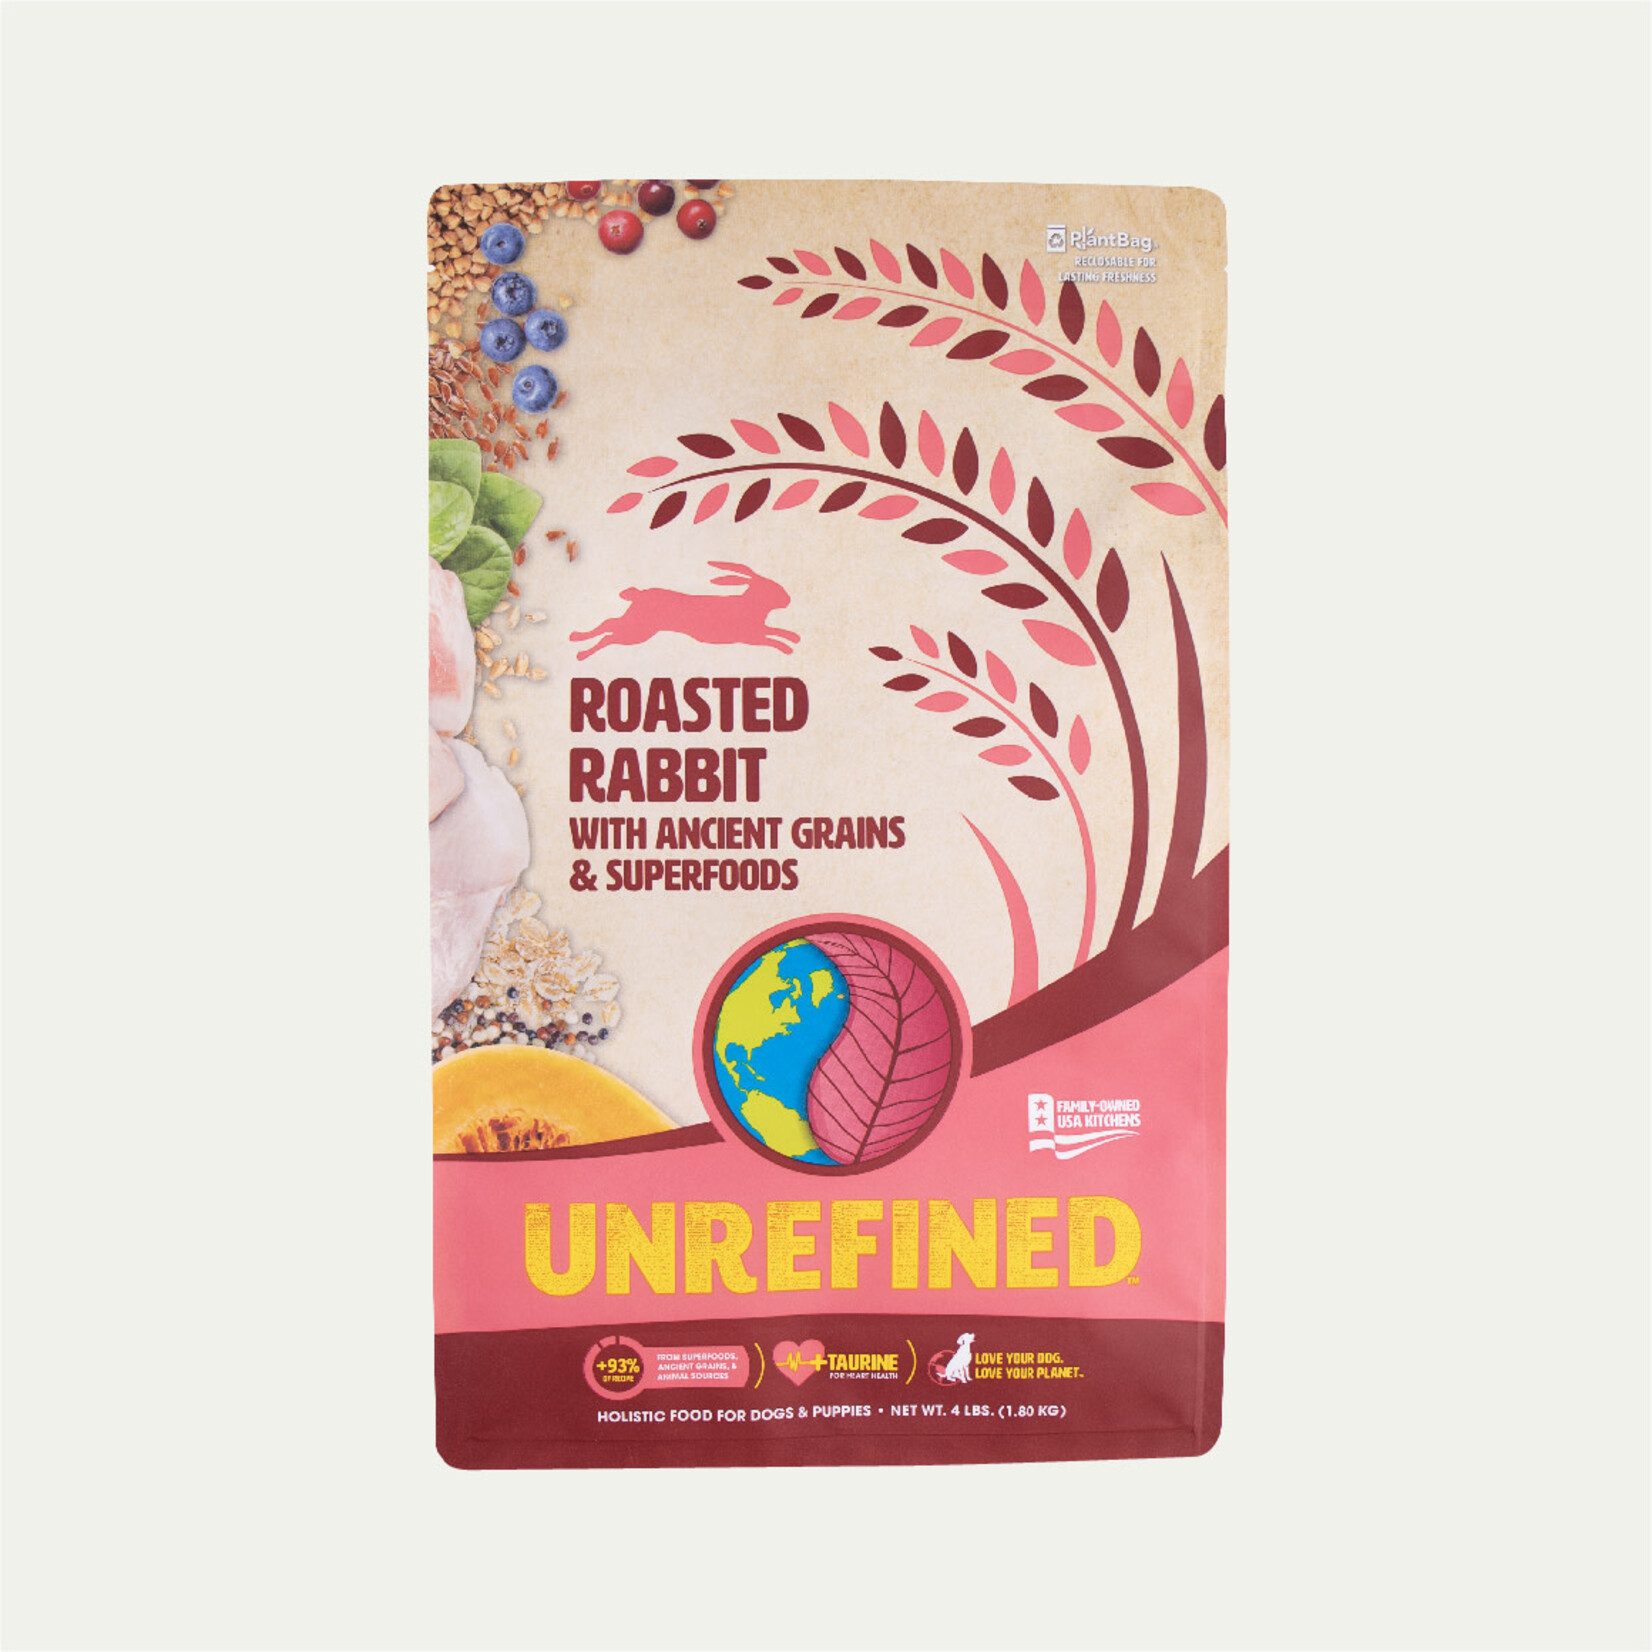 Earthborn Holistic Unrefined Roasted Rabbit with Ancient Grains & Superfoods